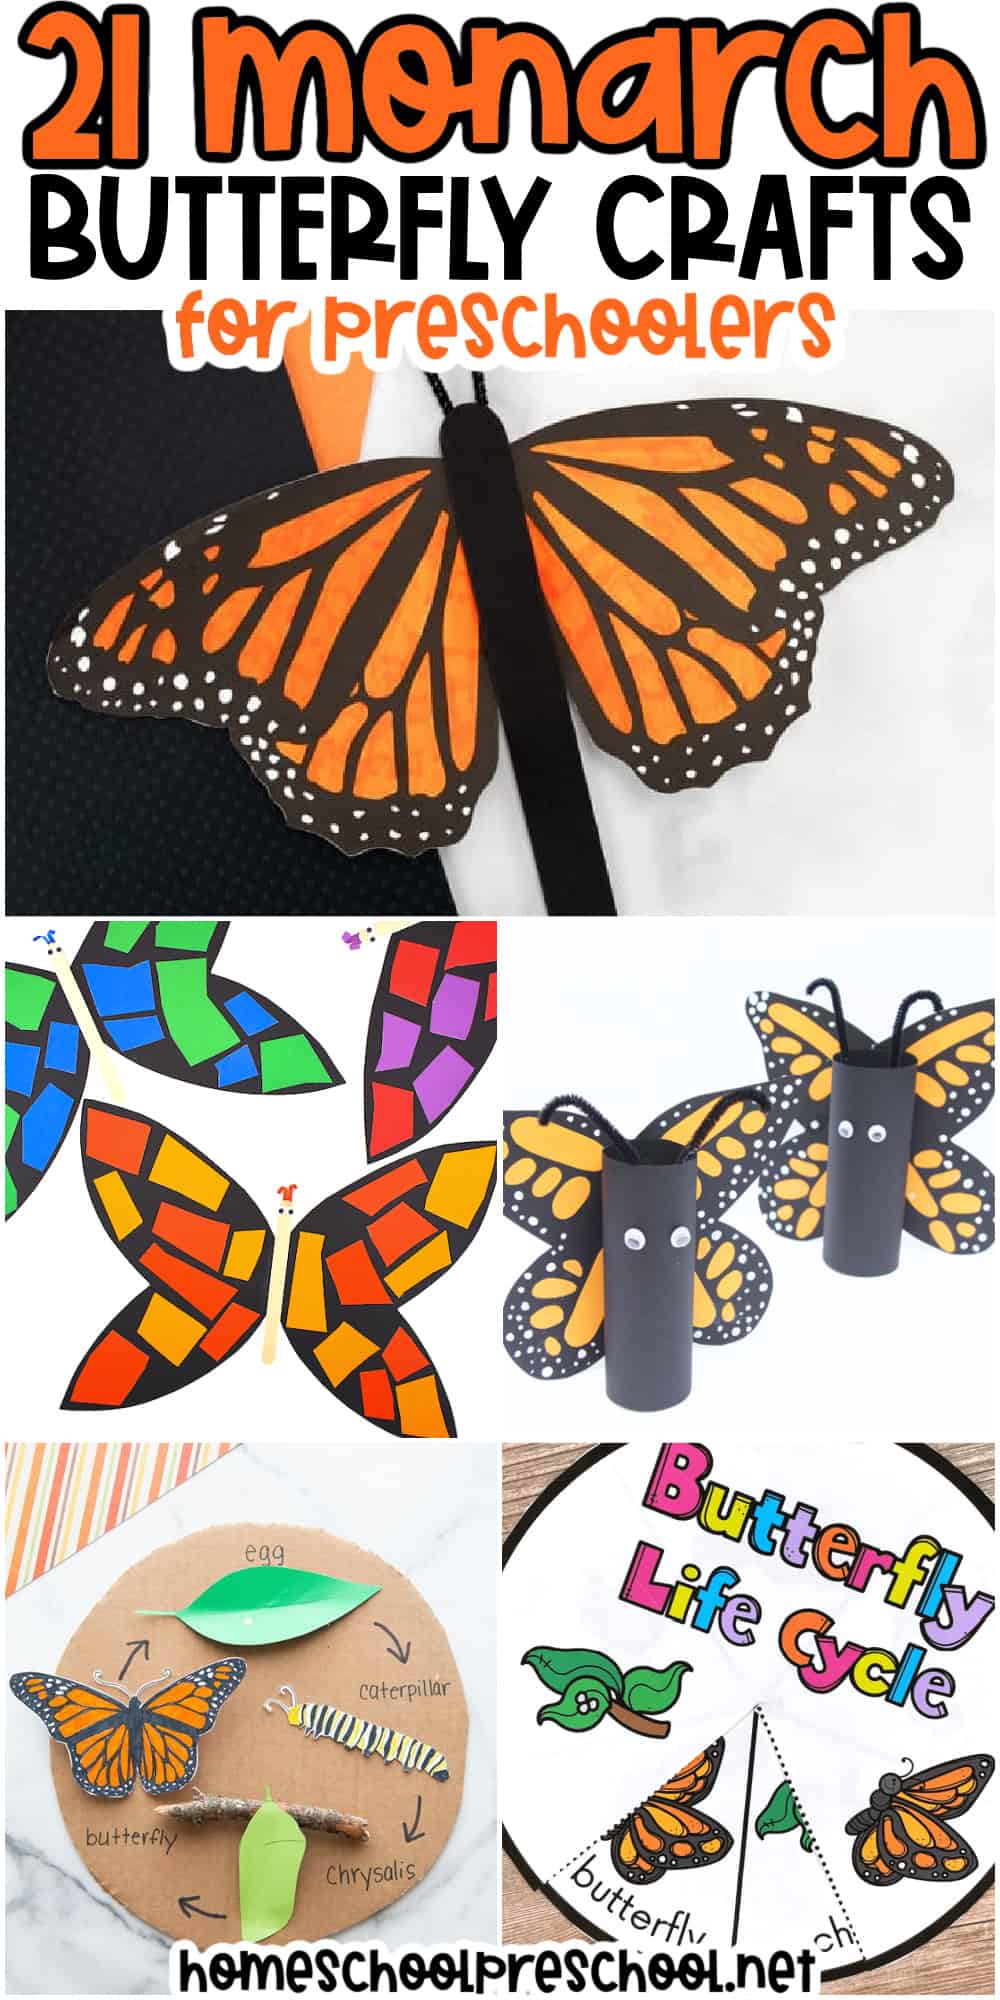 monarch-butterfly-crafts-long-pin 21 Monarch Butterfly Crafts for Preschoolers